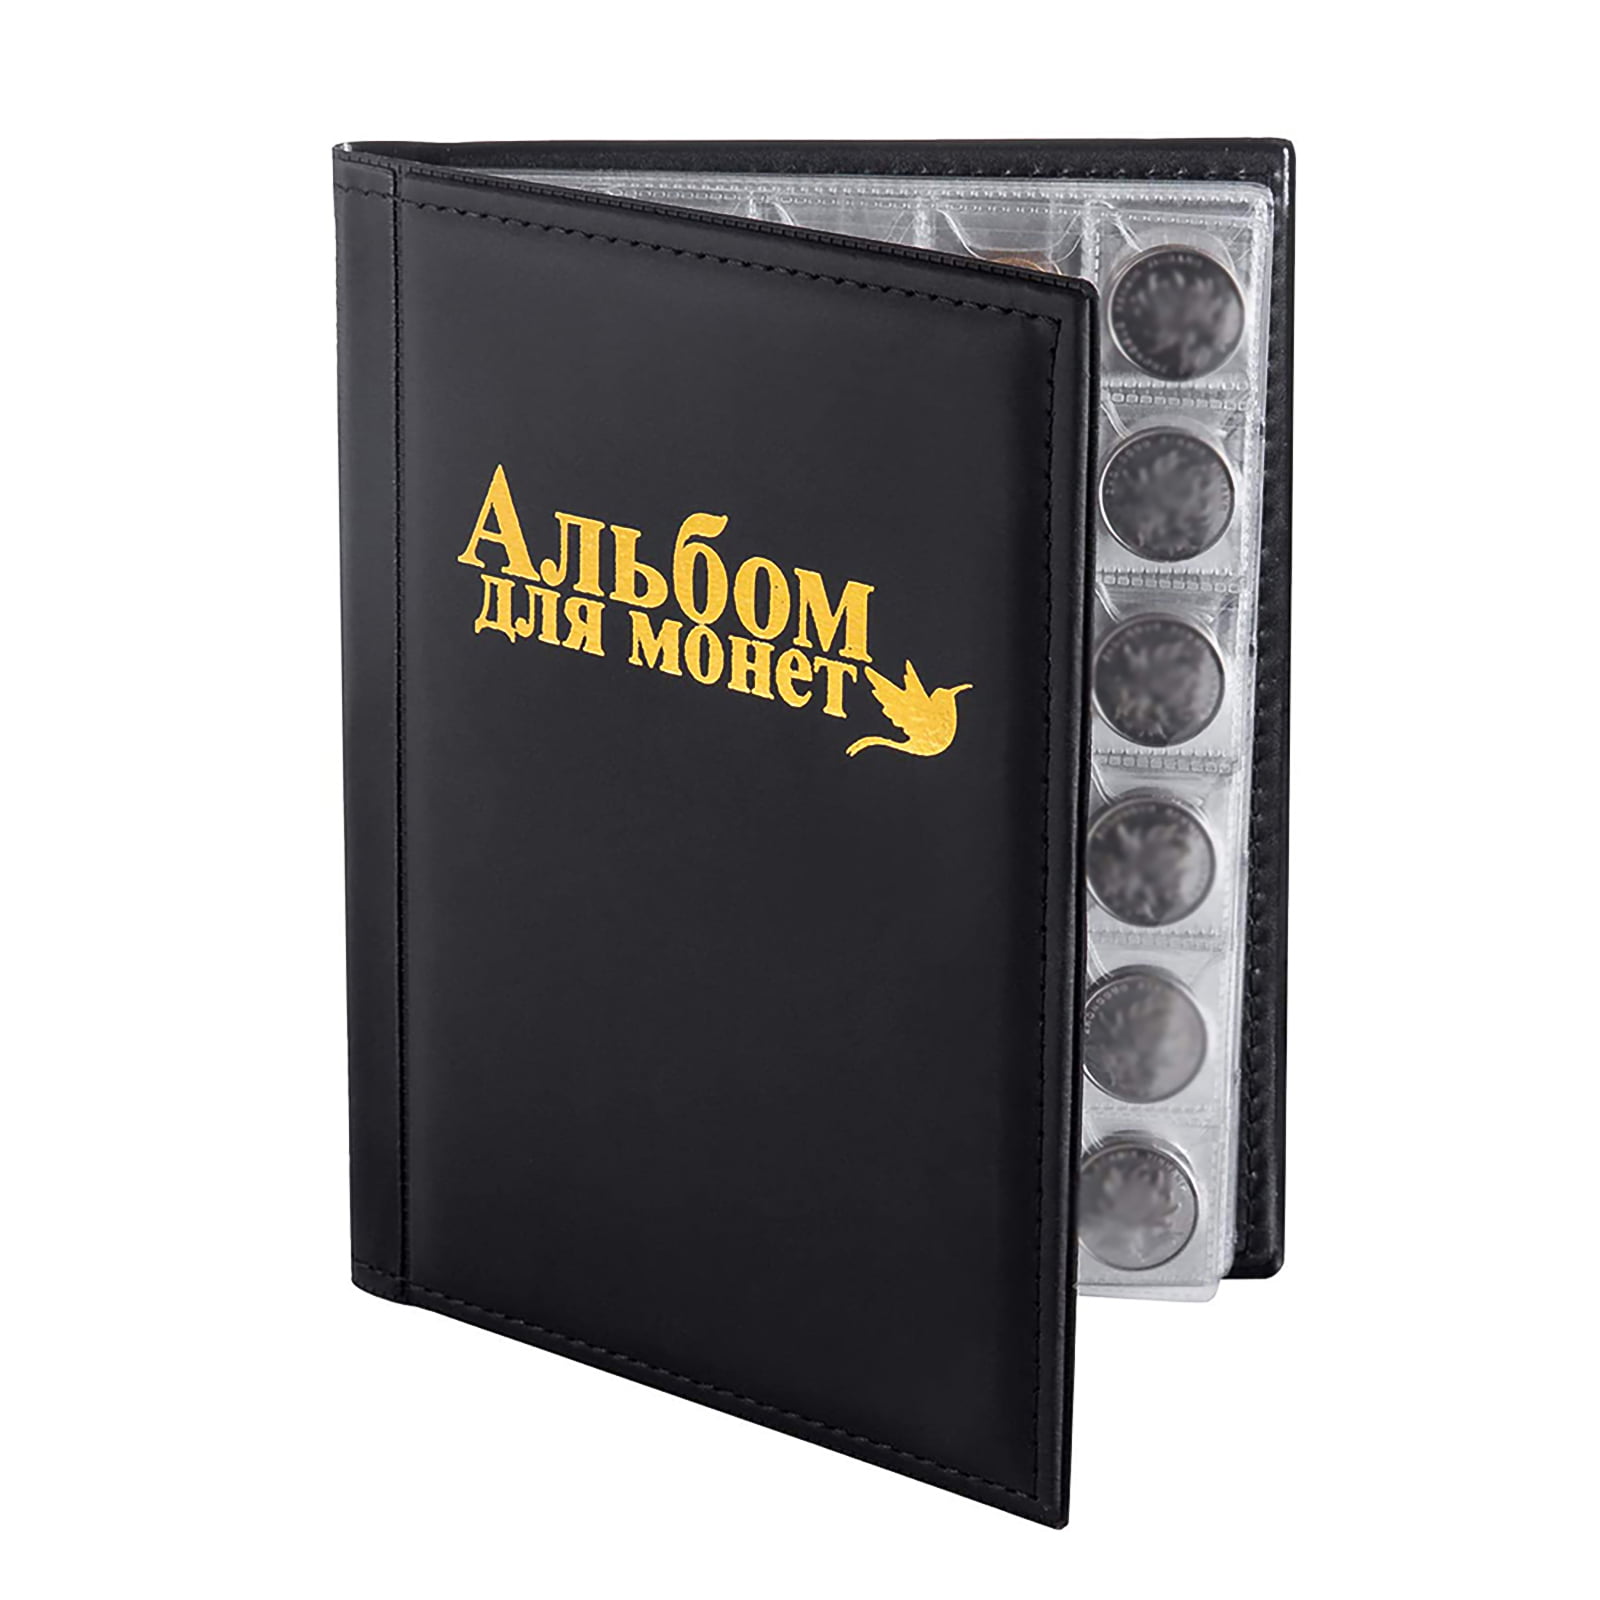 Pressed Penny Coin Holder Mini Album Book 4.5x5.75 Case w/ 8 Page Shee –  The Coin Digger